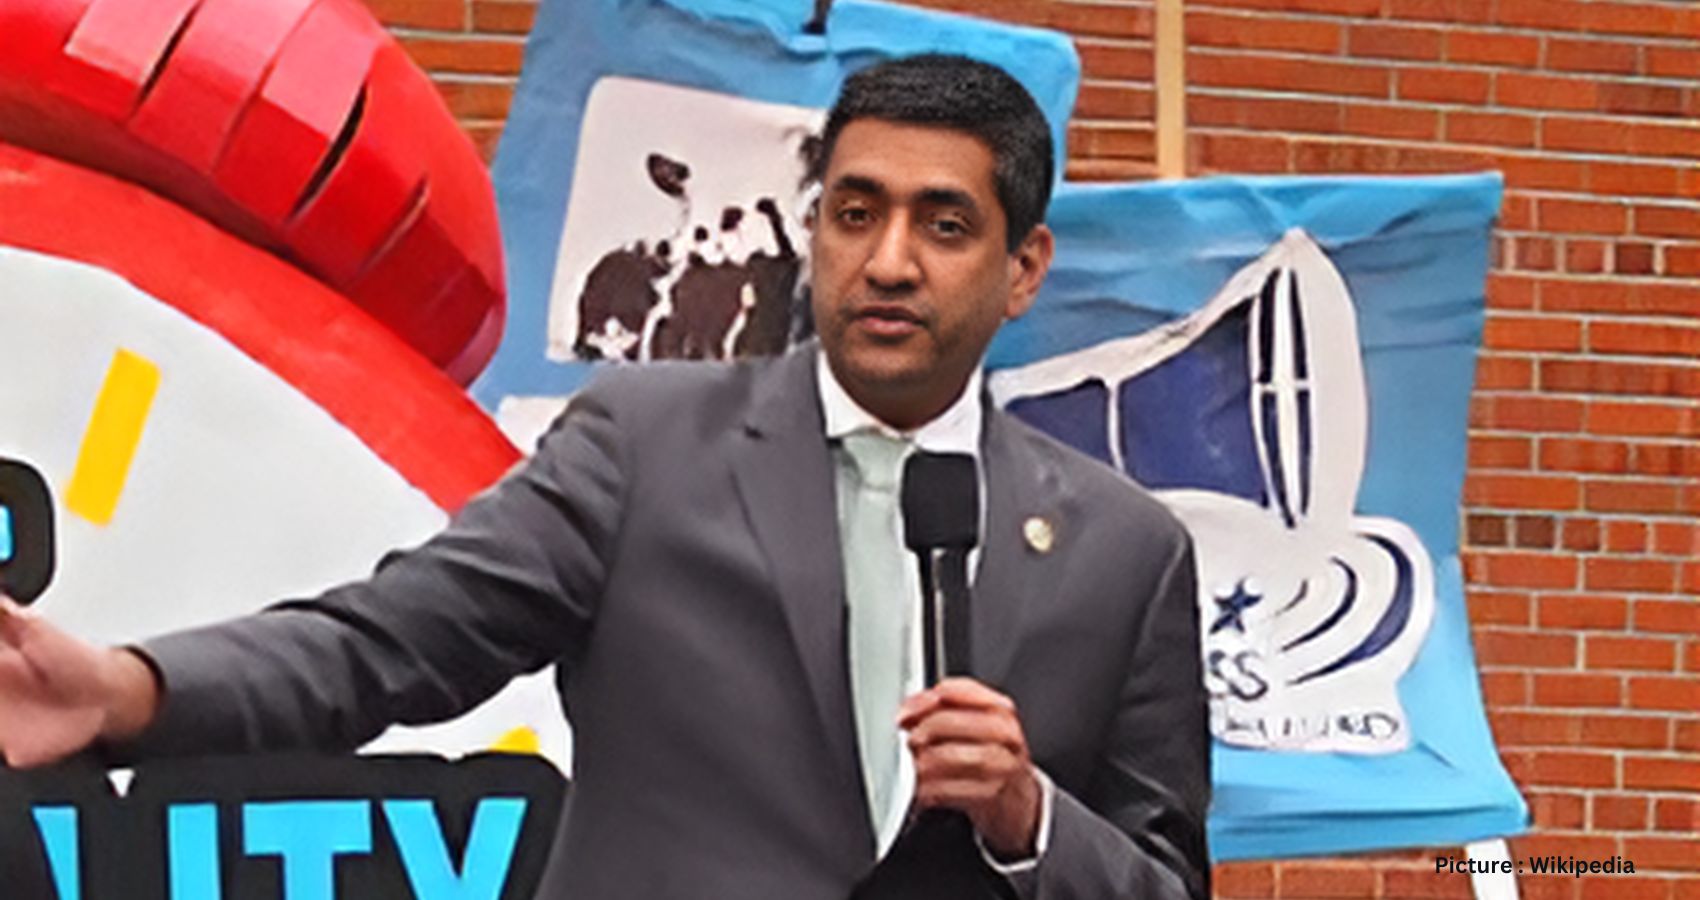 Featured & Cover Ro Khanna Advocates Constructive Dialogue for India US Relations Speculation Arises on Presidential Run